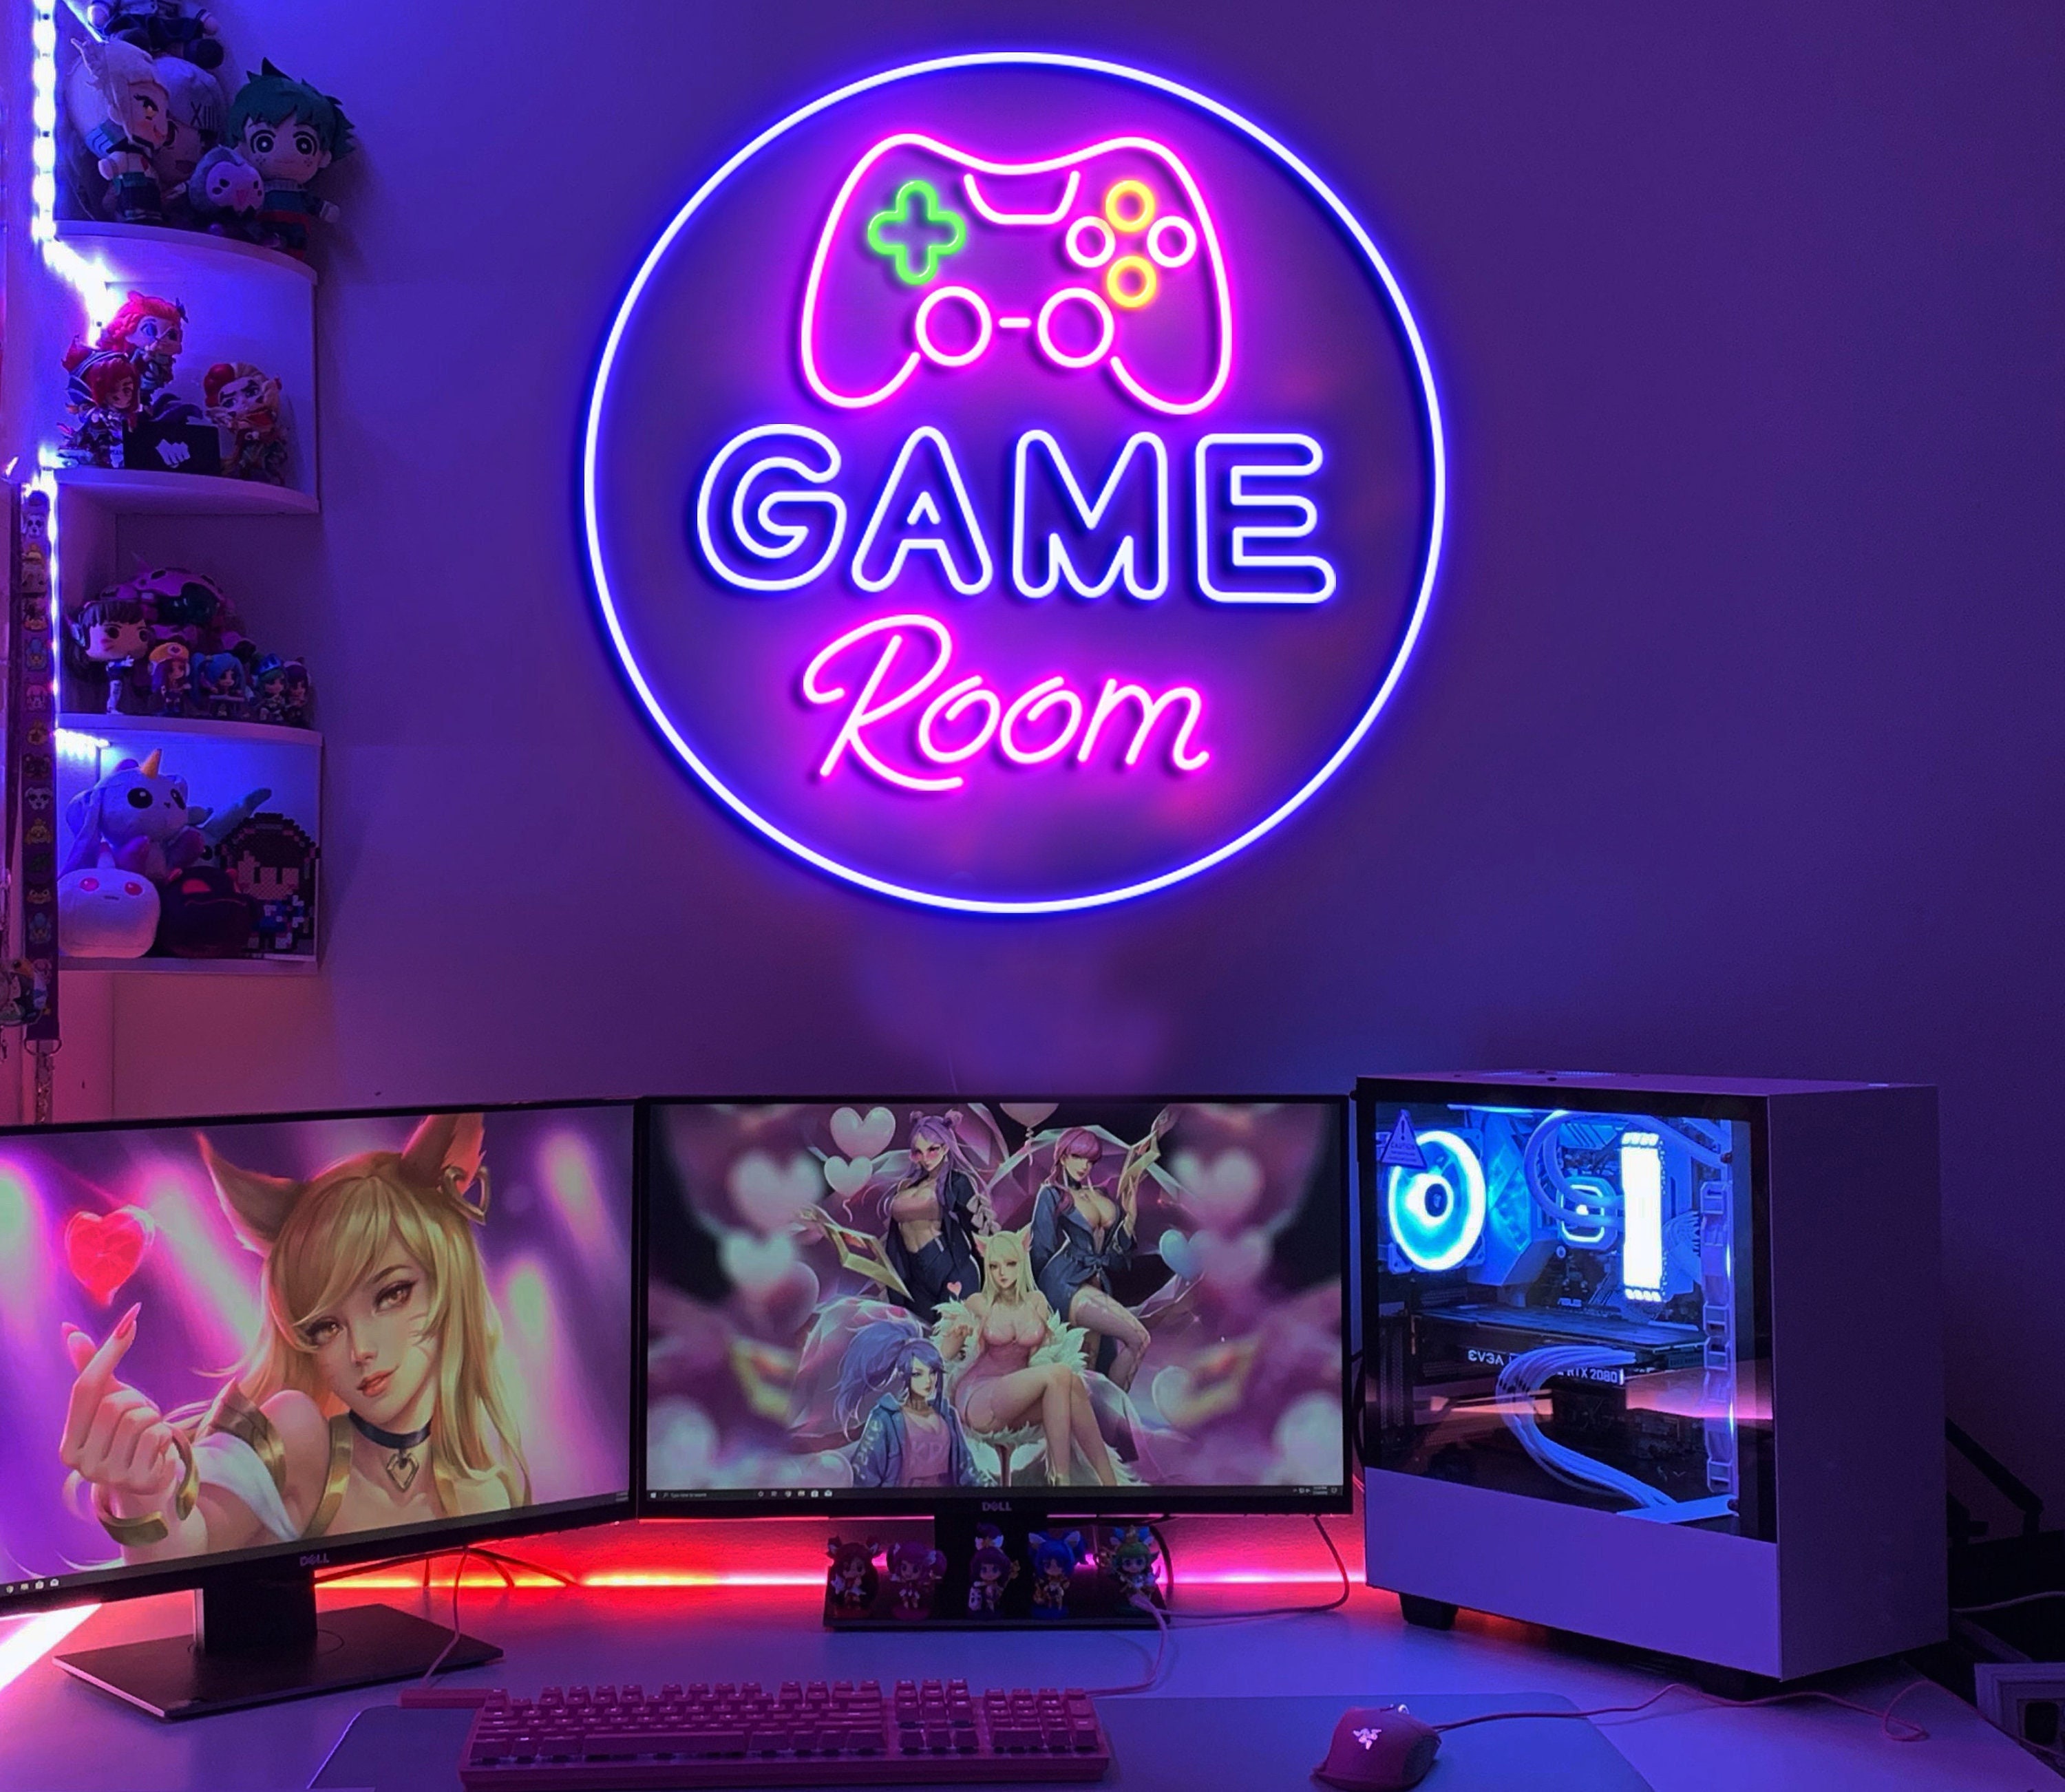 Game Room Neon Sign Led Lights for Gaming Room Neon - Etsy